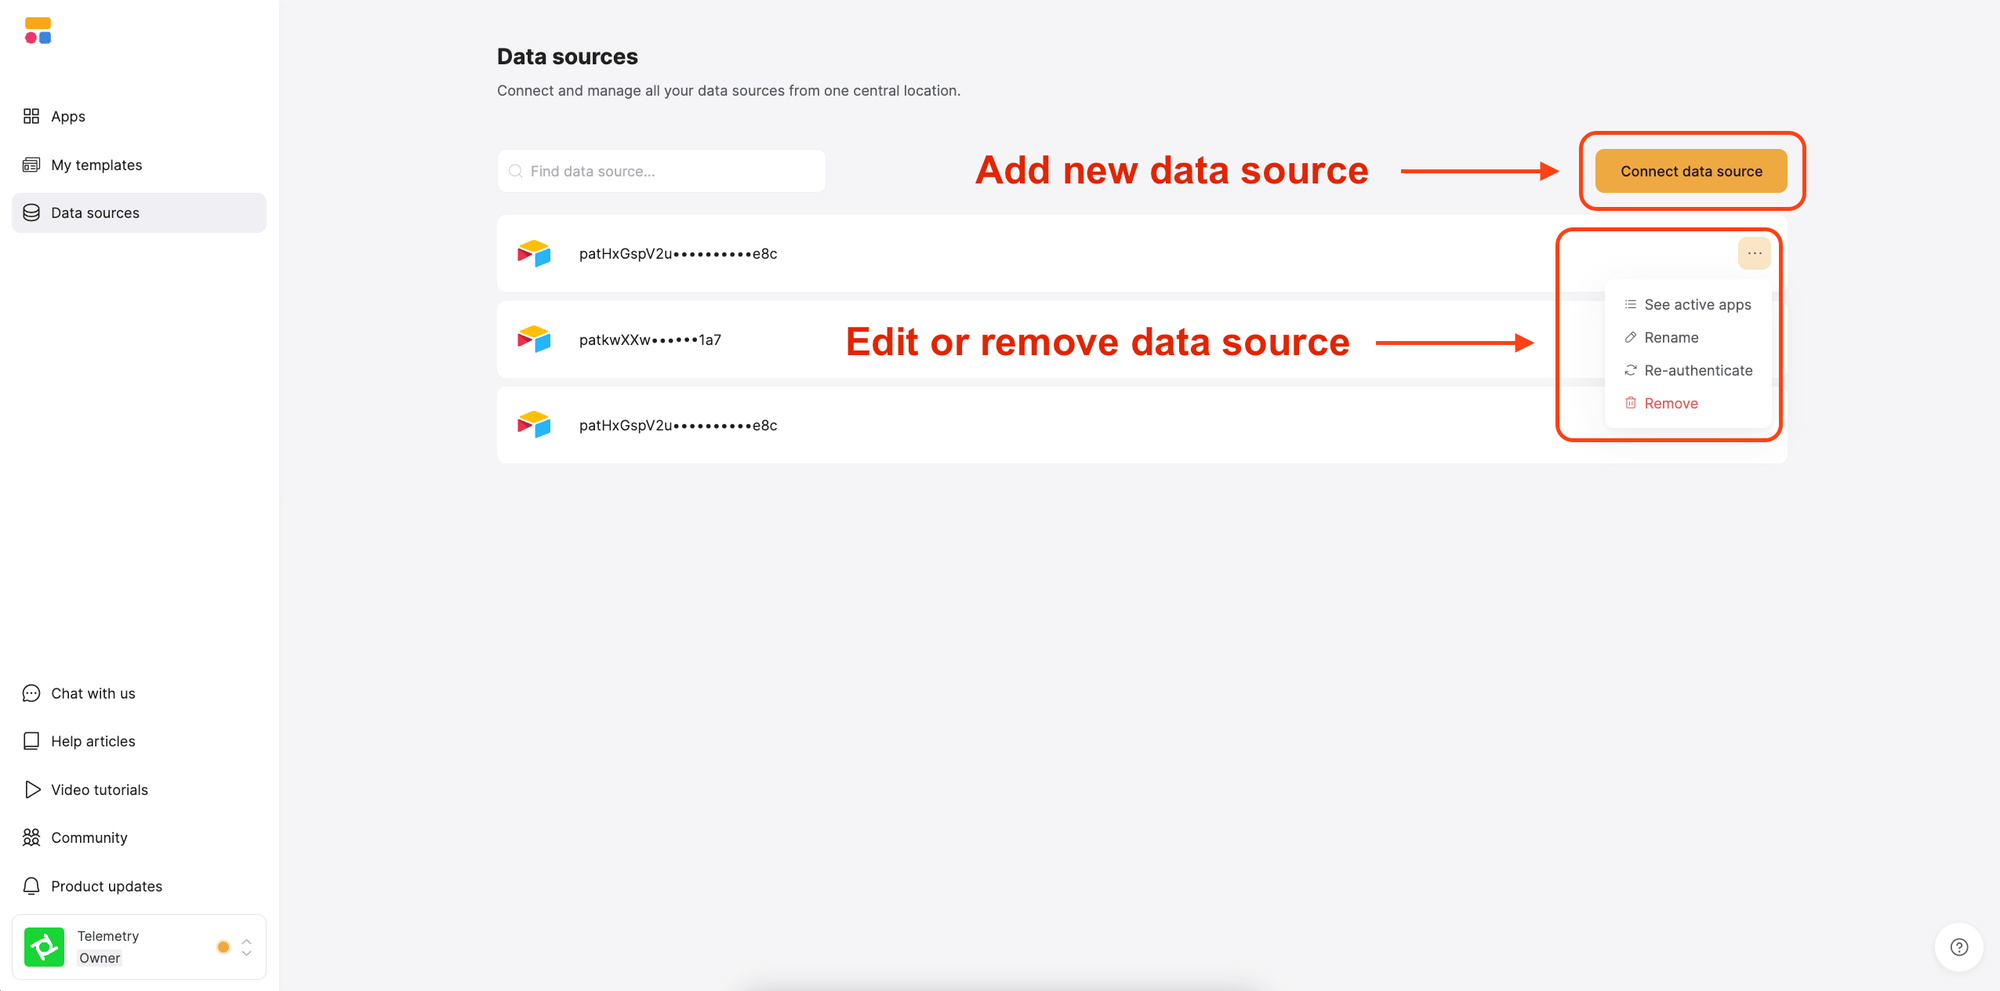 Add, edit, or remove a datasource using the buttons on the dashboard